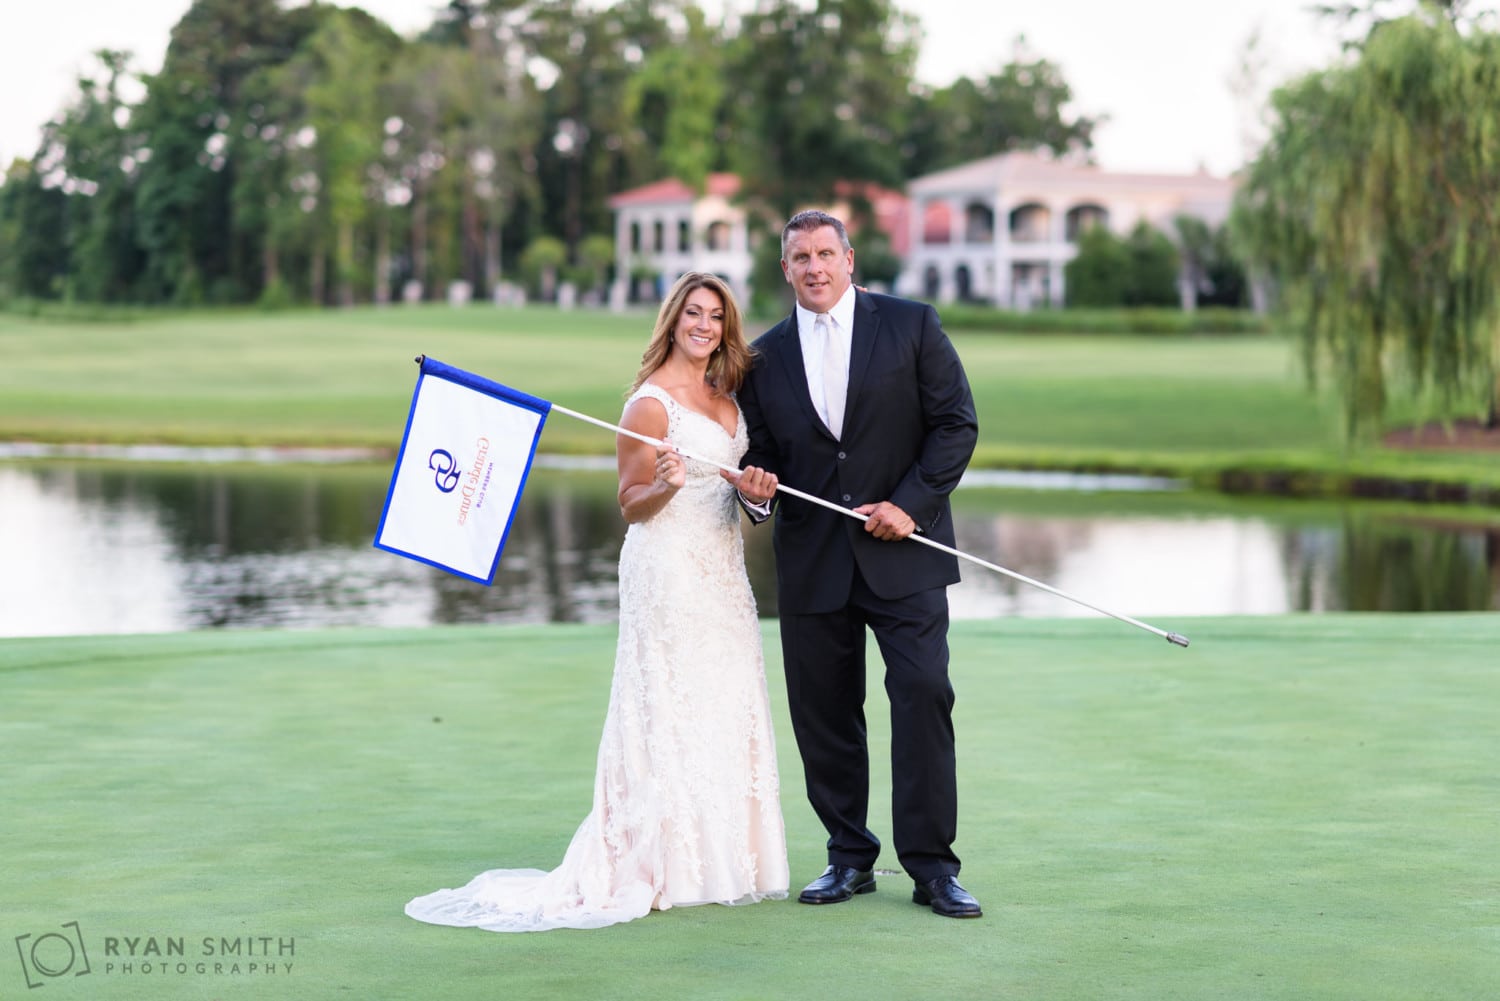 Holding the Grande Dunes golf course flag - Members Club at Grande Dunes